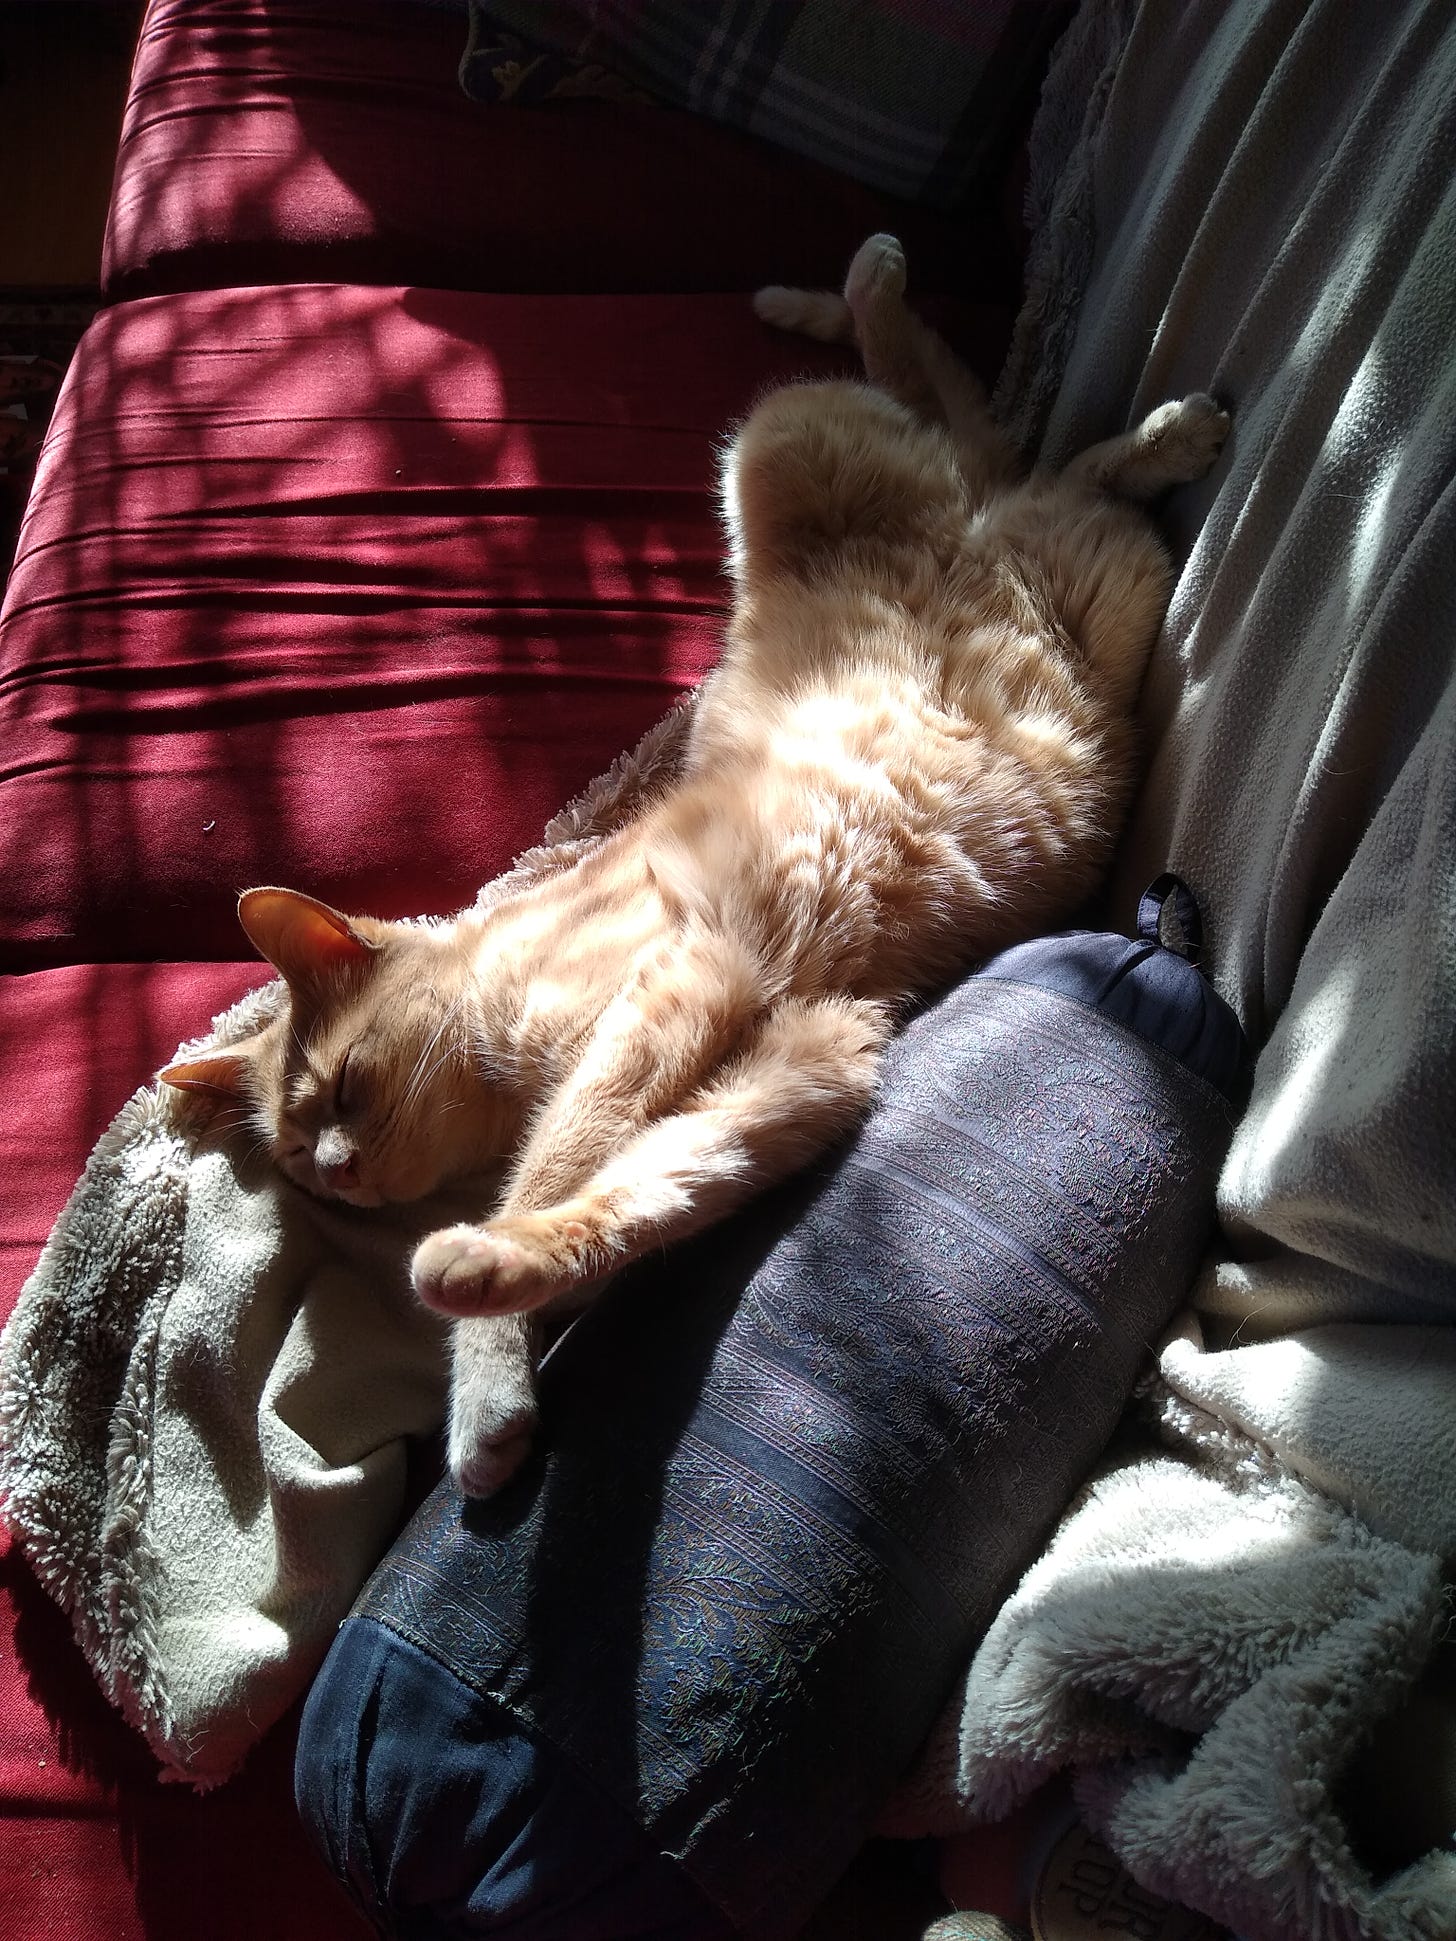 Onion is a pale ginger cat, lying on his back with his tummy exposed